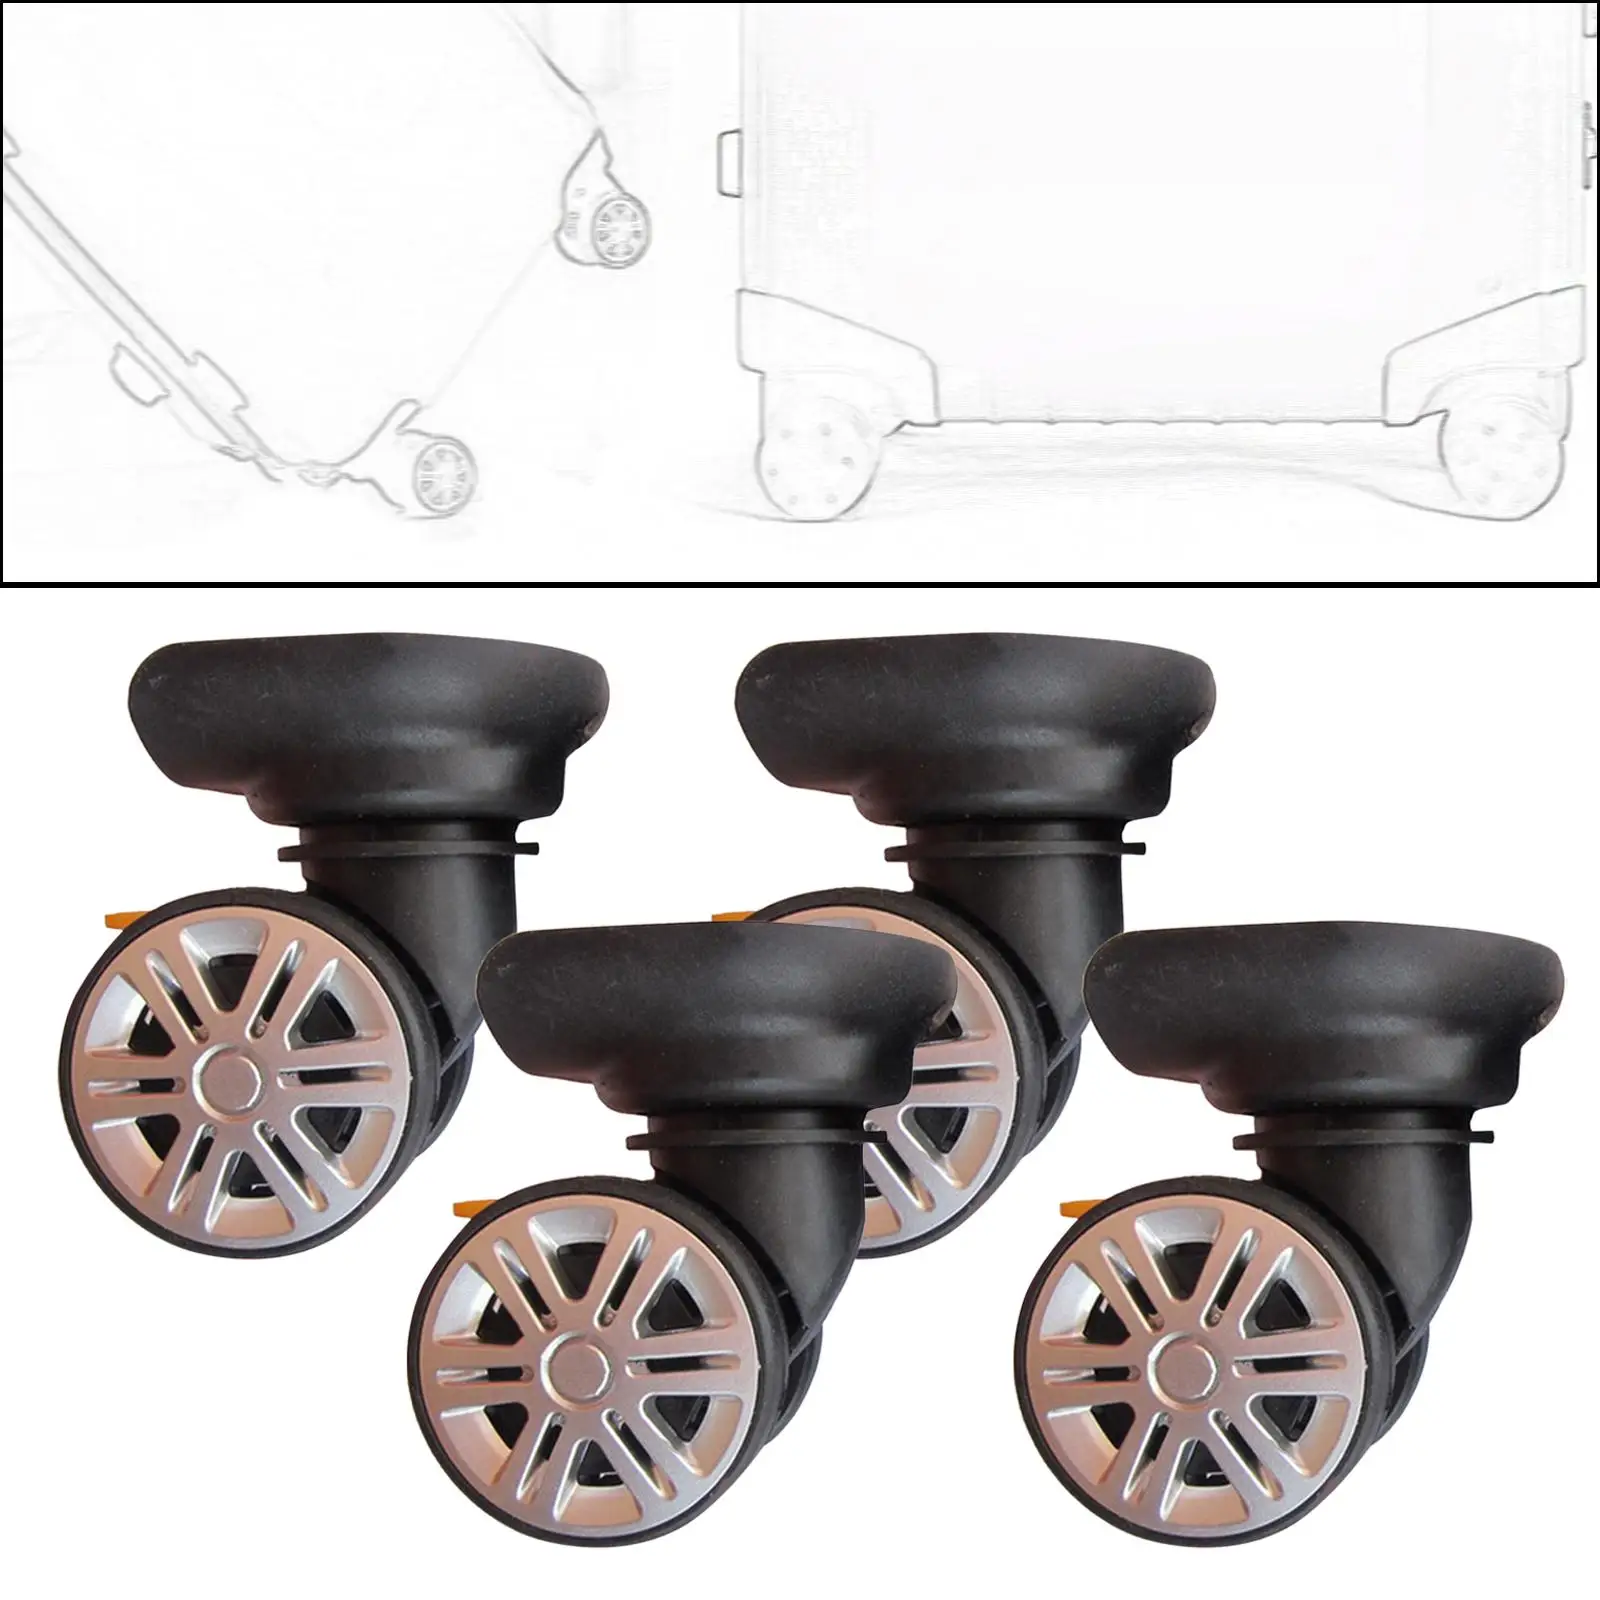 4Pcs Luggage Suitcase Wheels Replacement Parts Portable Suitcase Swivel Wheels for Travelling Case Luggage Trolley Case